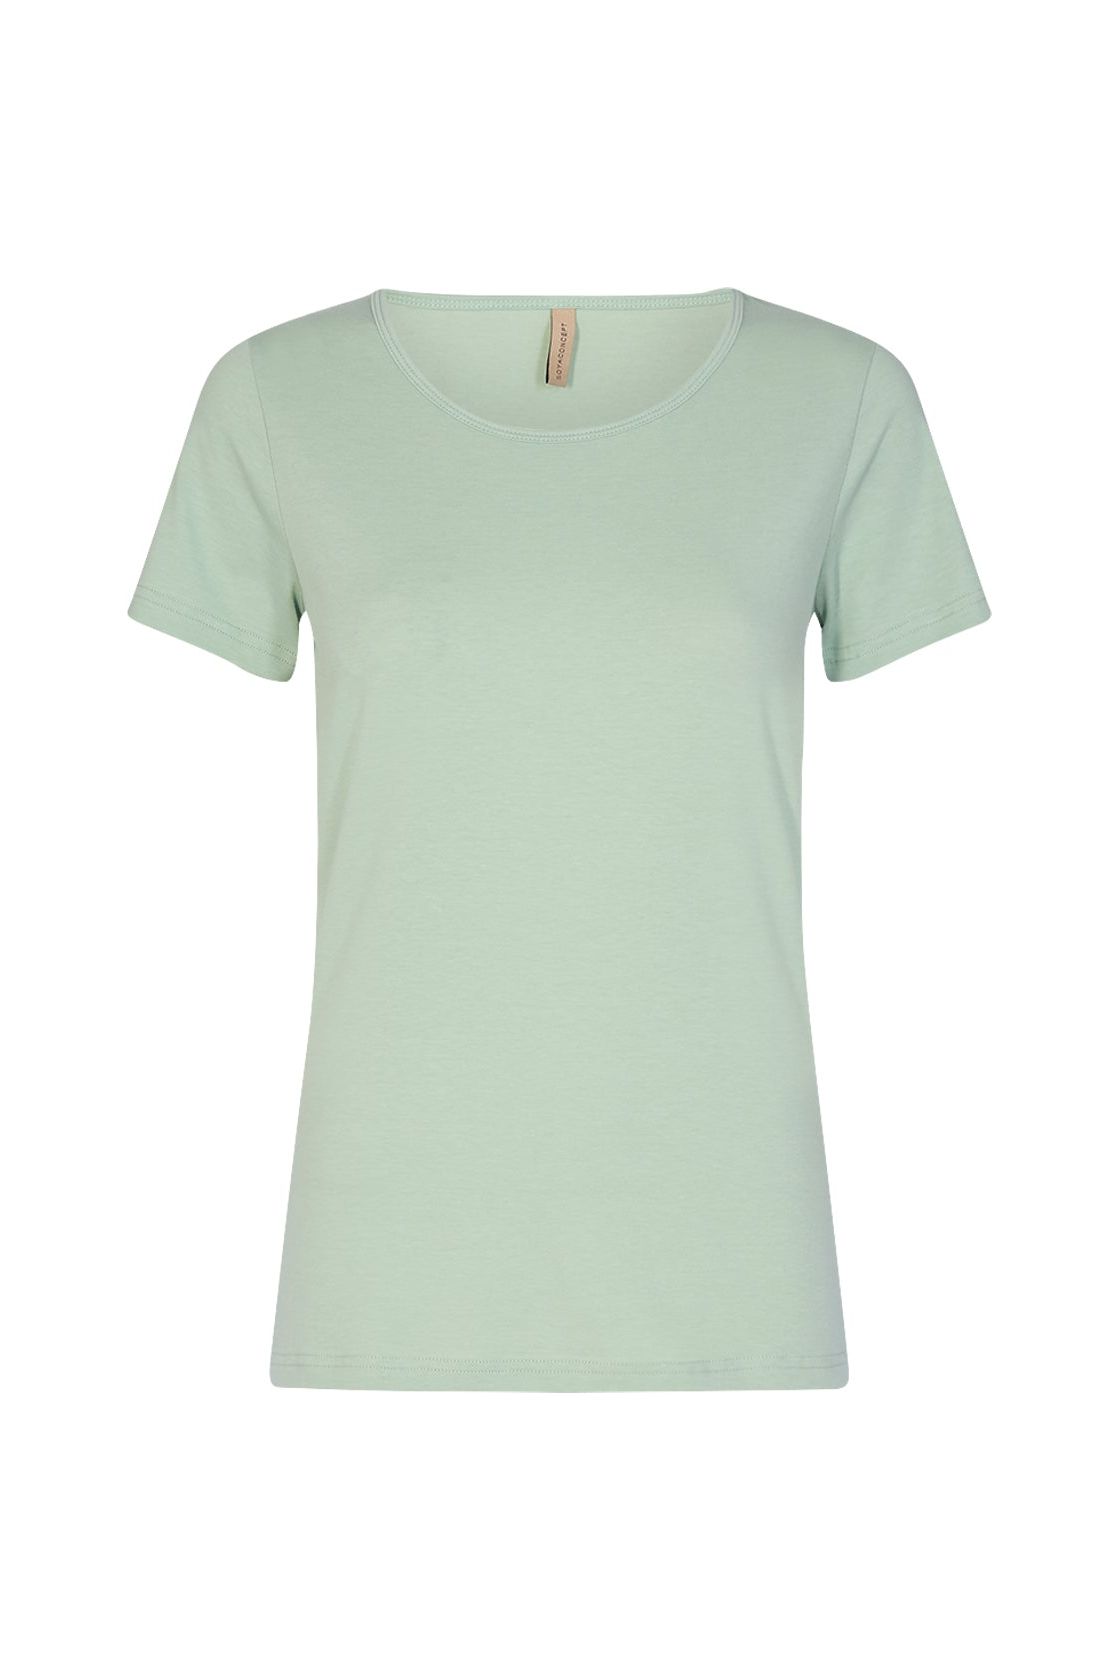 Soya Concept - Ladies Knitted Top - Off White & Frosty Green - P24740